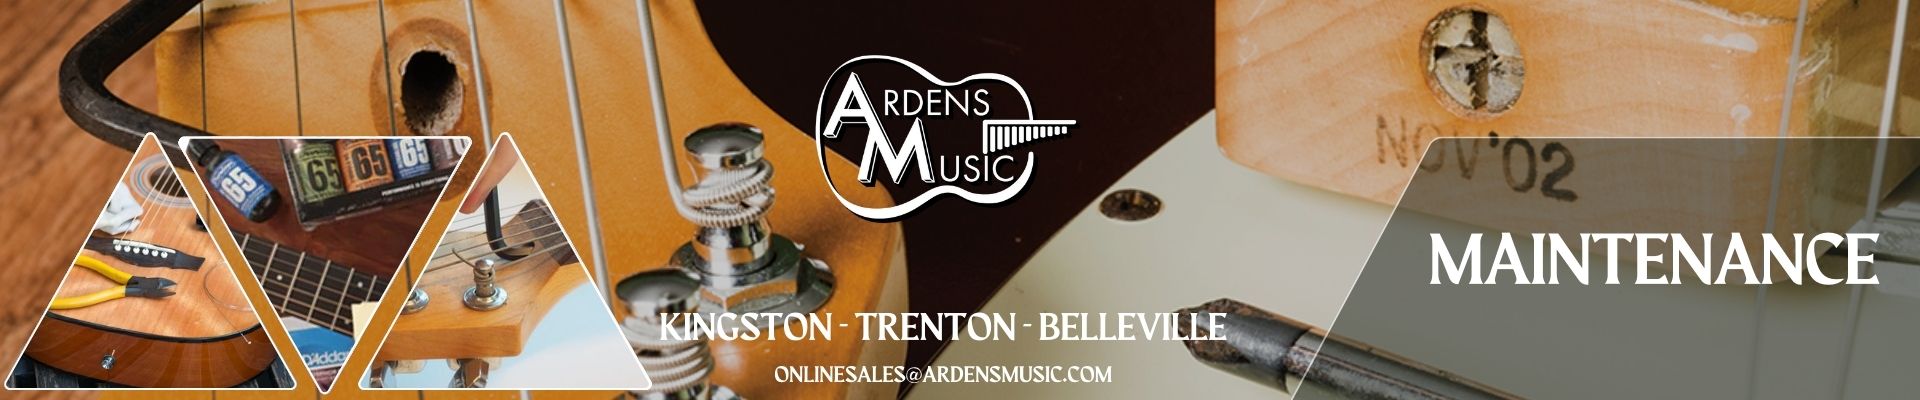 Looking after your instrument is the key to making sure it stays stable and playable. Arden's offers a wide range of products from brands like Fender, MusicNomad, Dunlop, and D'addario.